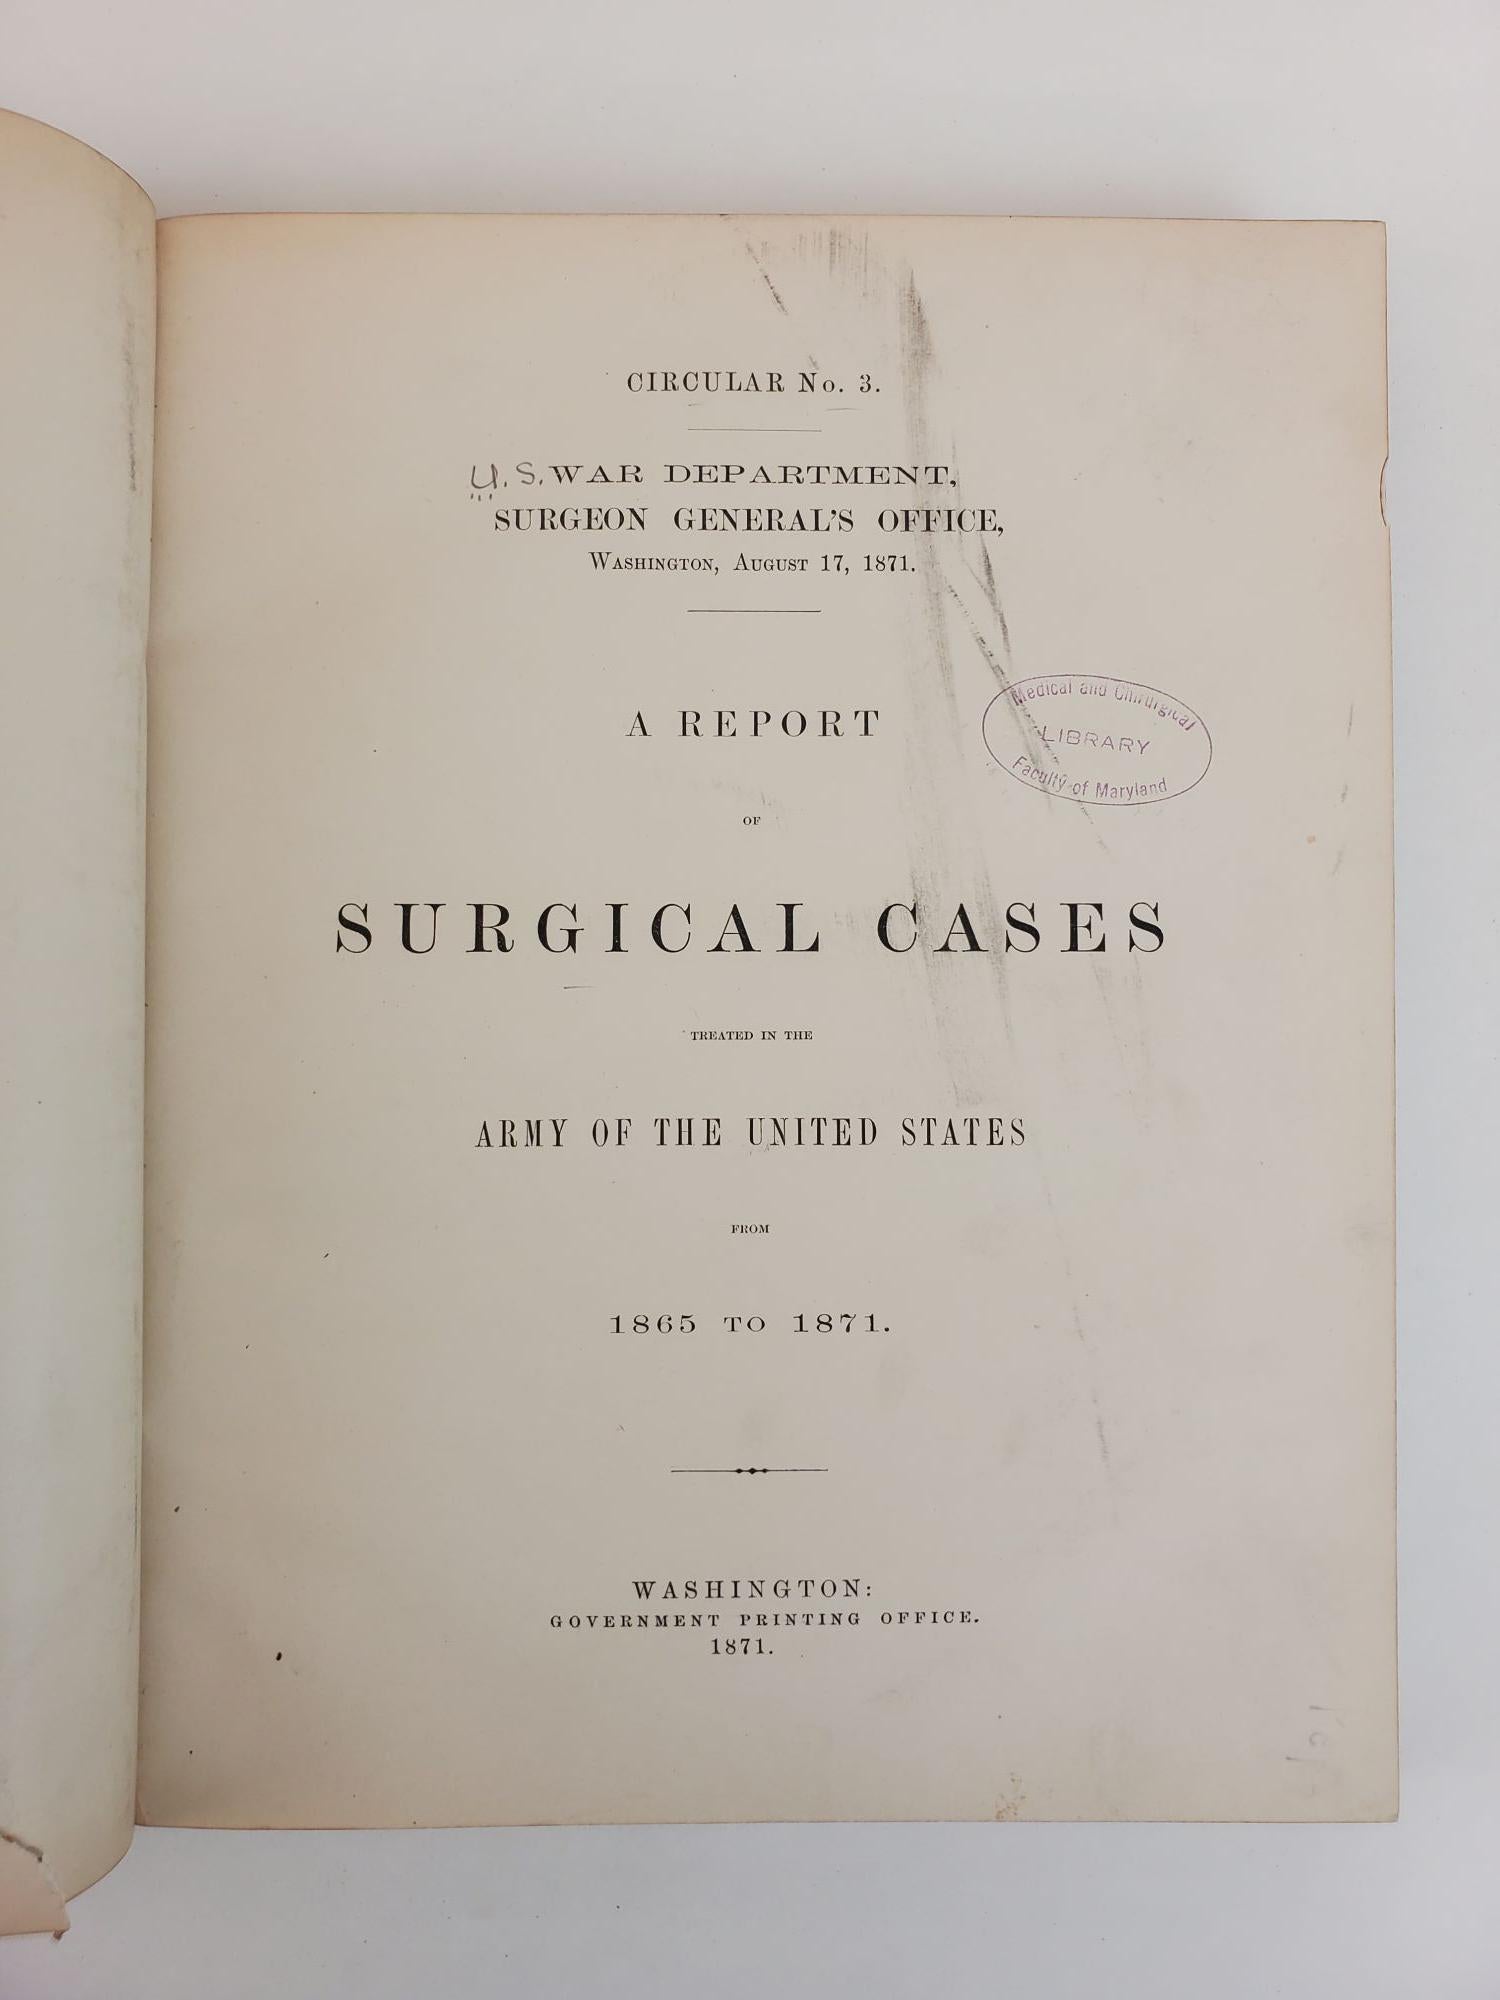 Product Image for A REPORT OF SURGICAL CASES TREATED IN THE ARMY OF THE UNITED STATES FROM 1865 TO 1871: CIRCULAR NO. 3